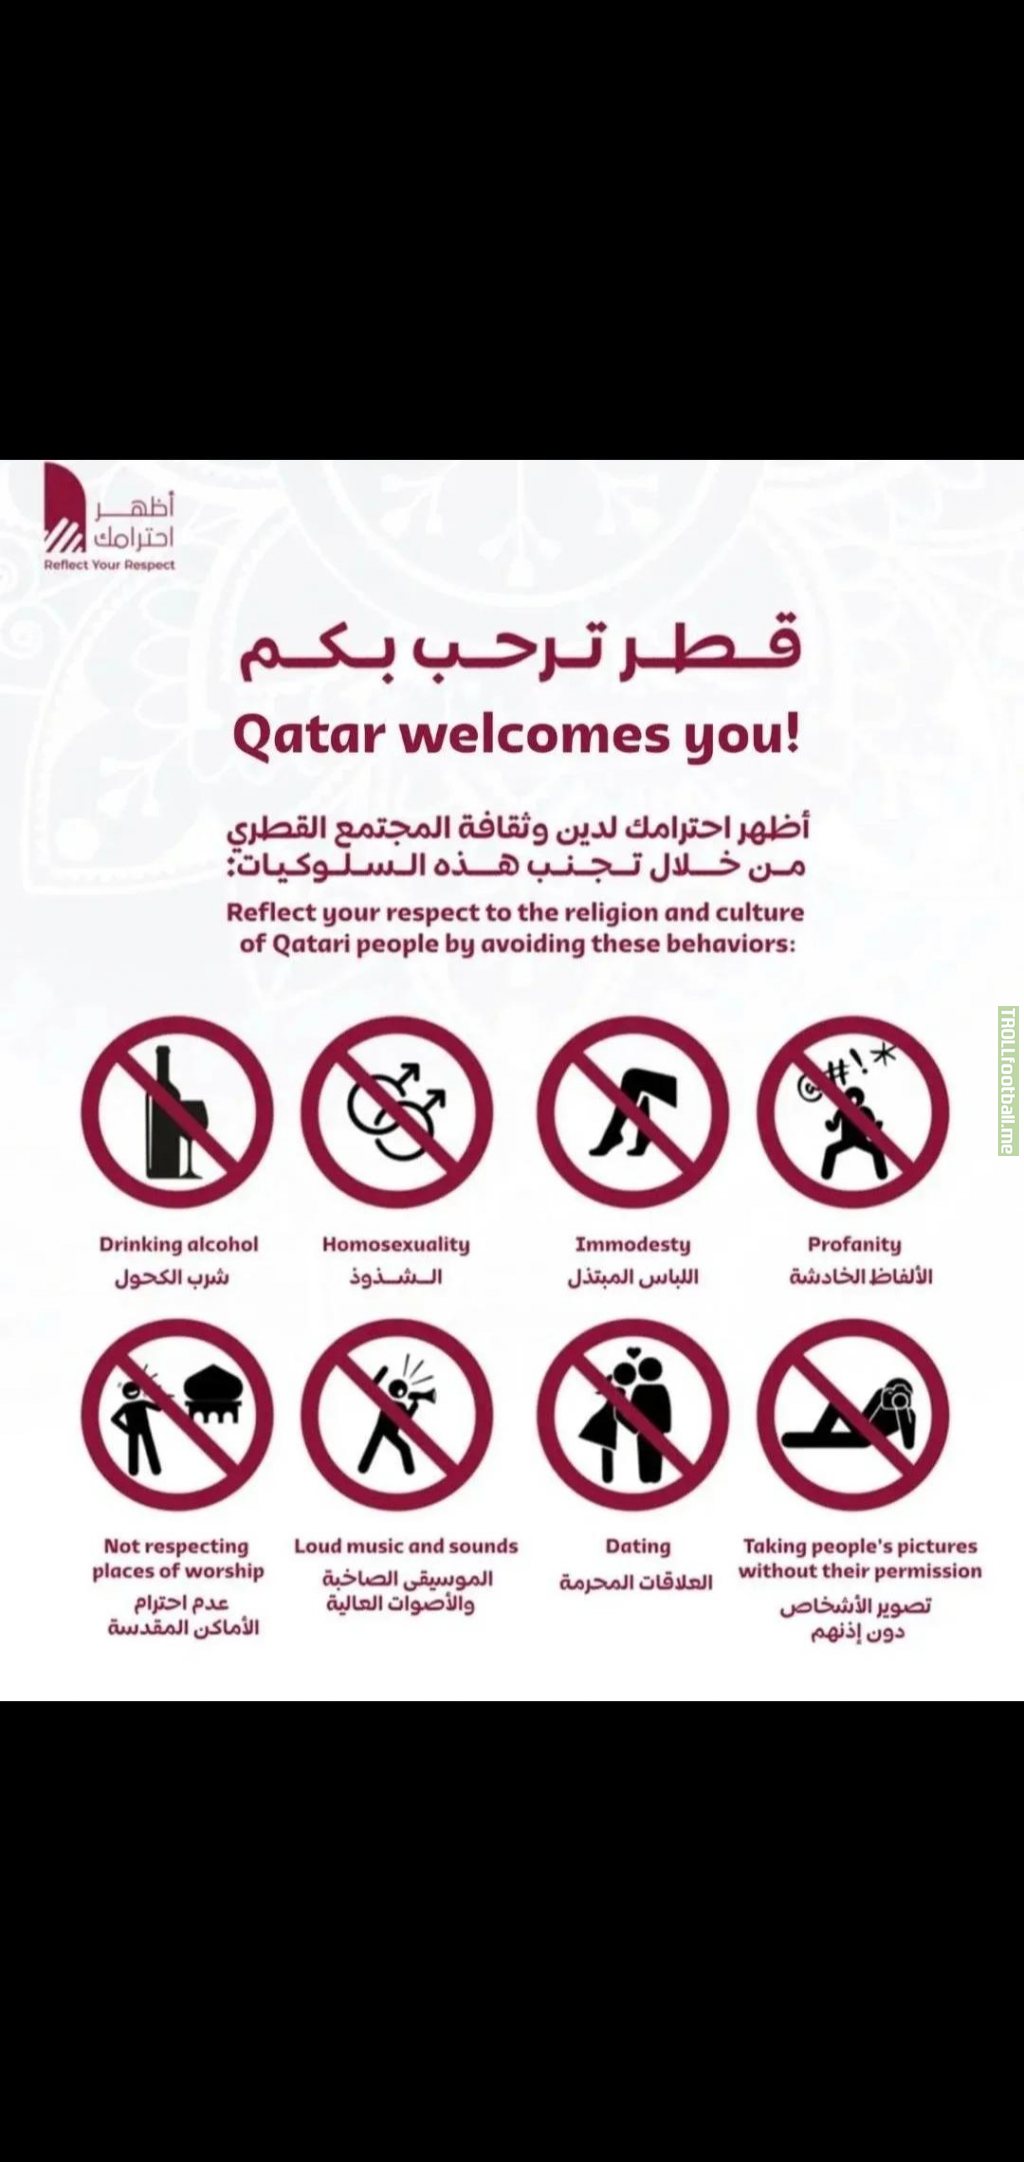 Qatar welcomes you to the world cup . here are the rules